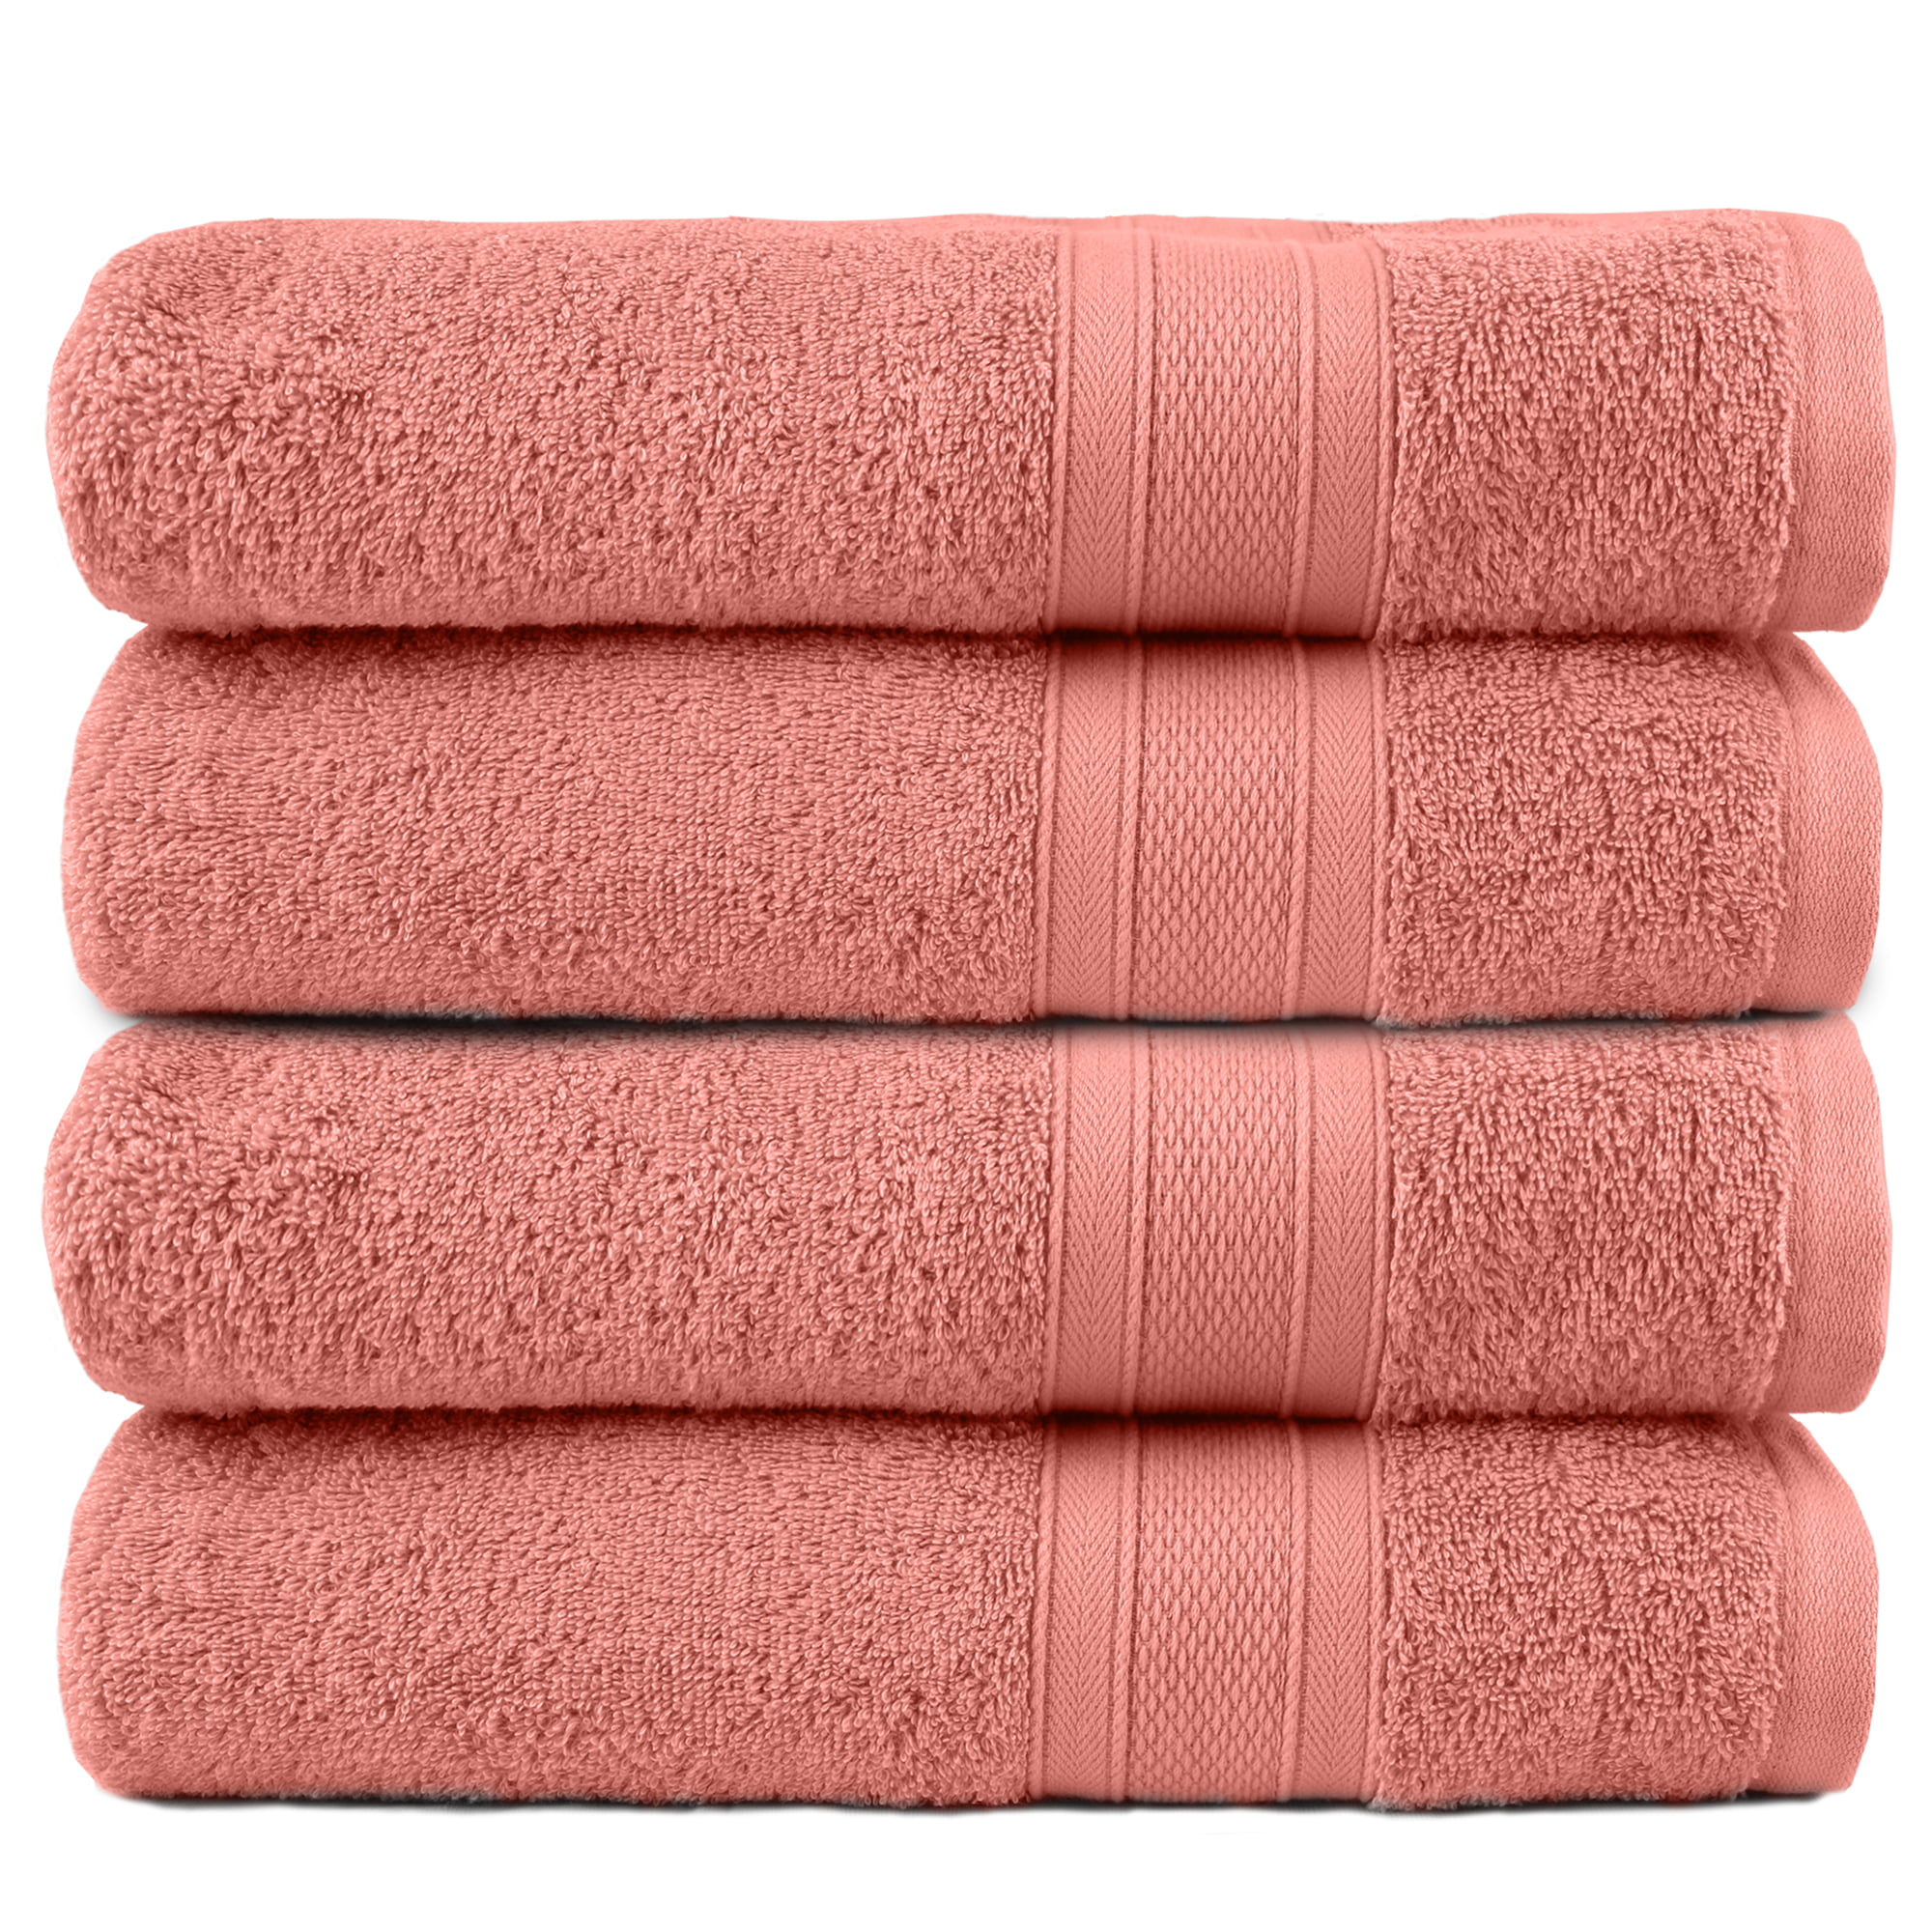 800GSM Luxuriously Soft Feel 8 Piece Towel Set Coral New 